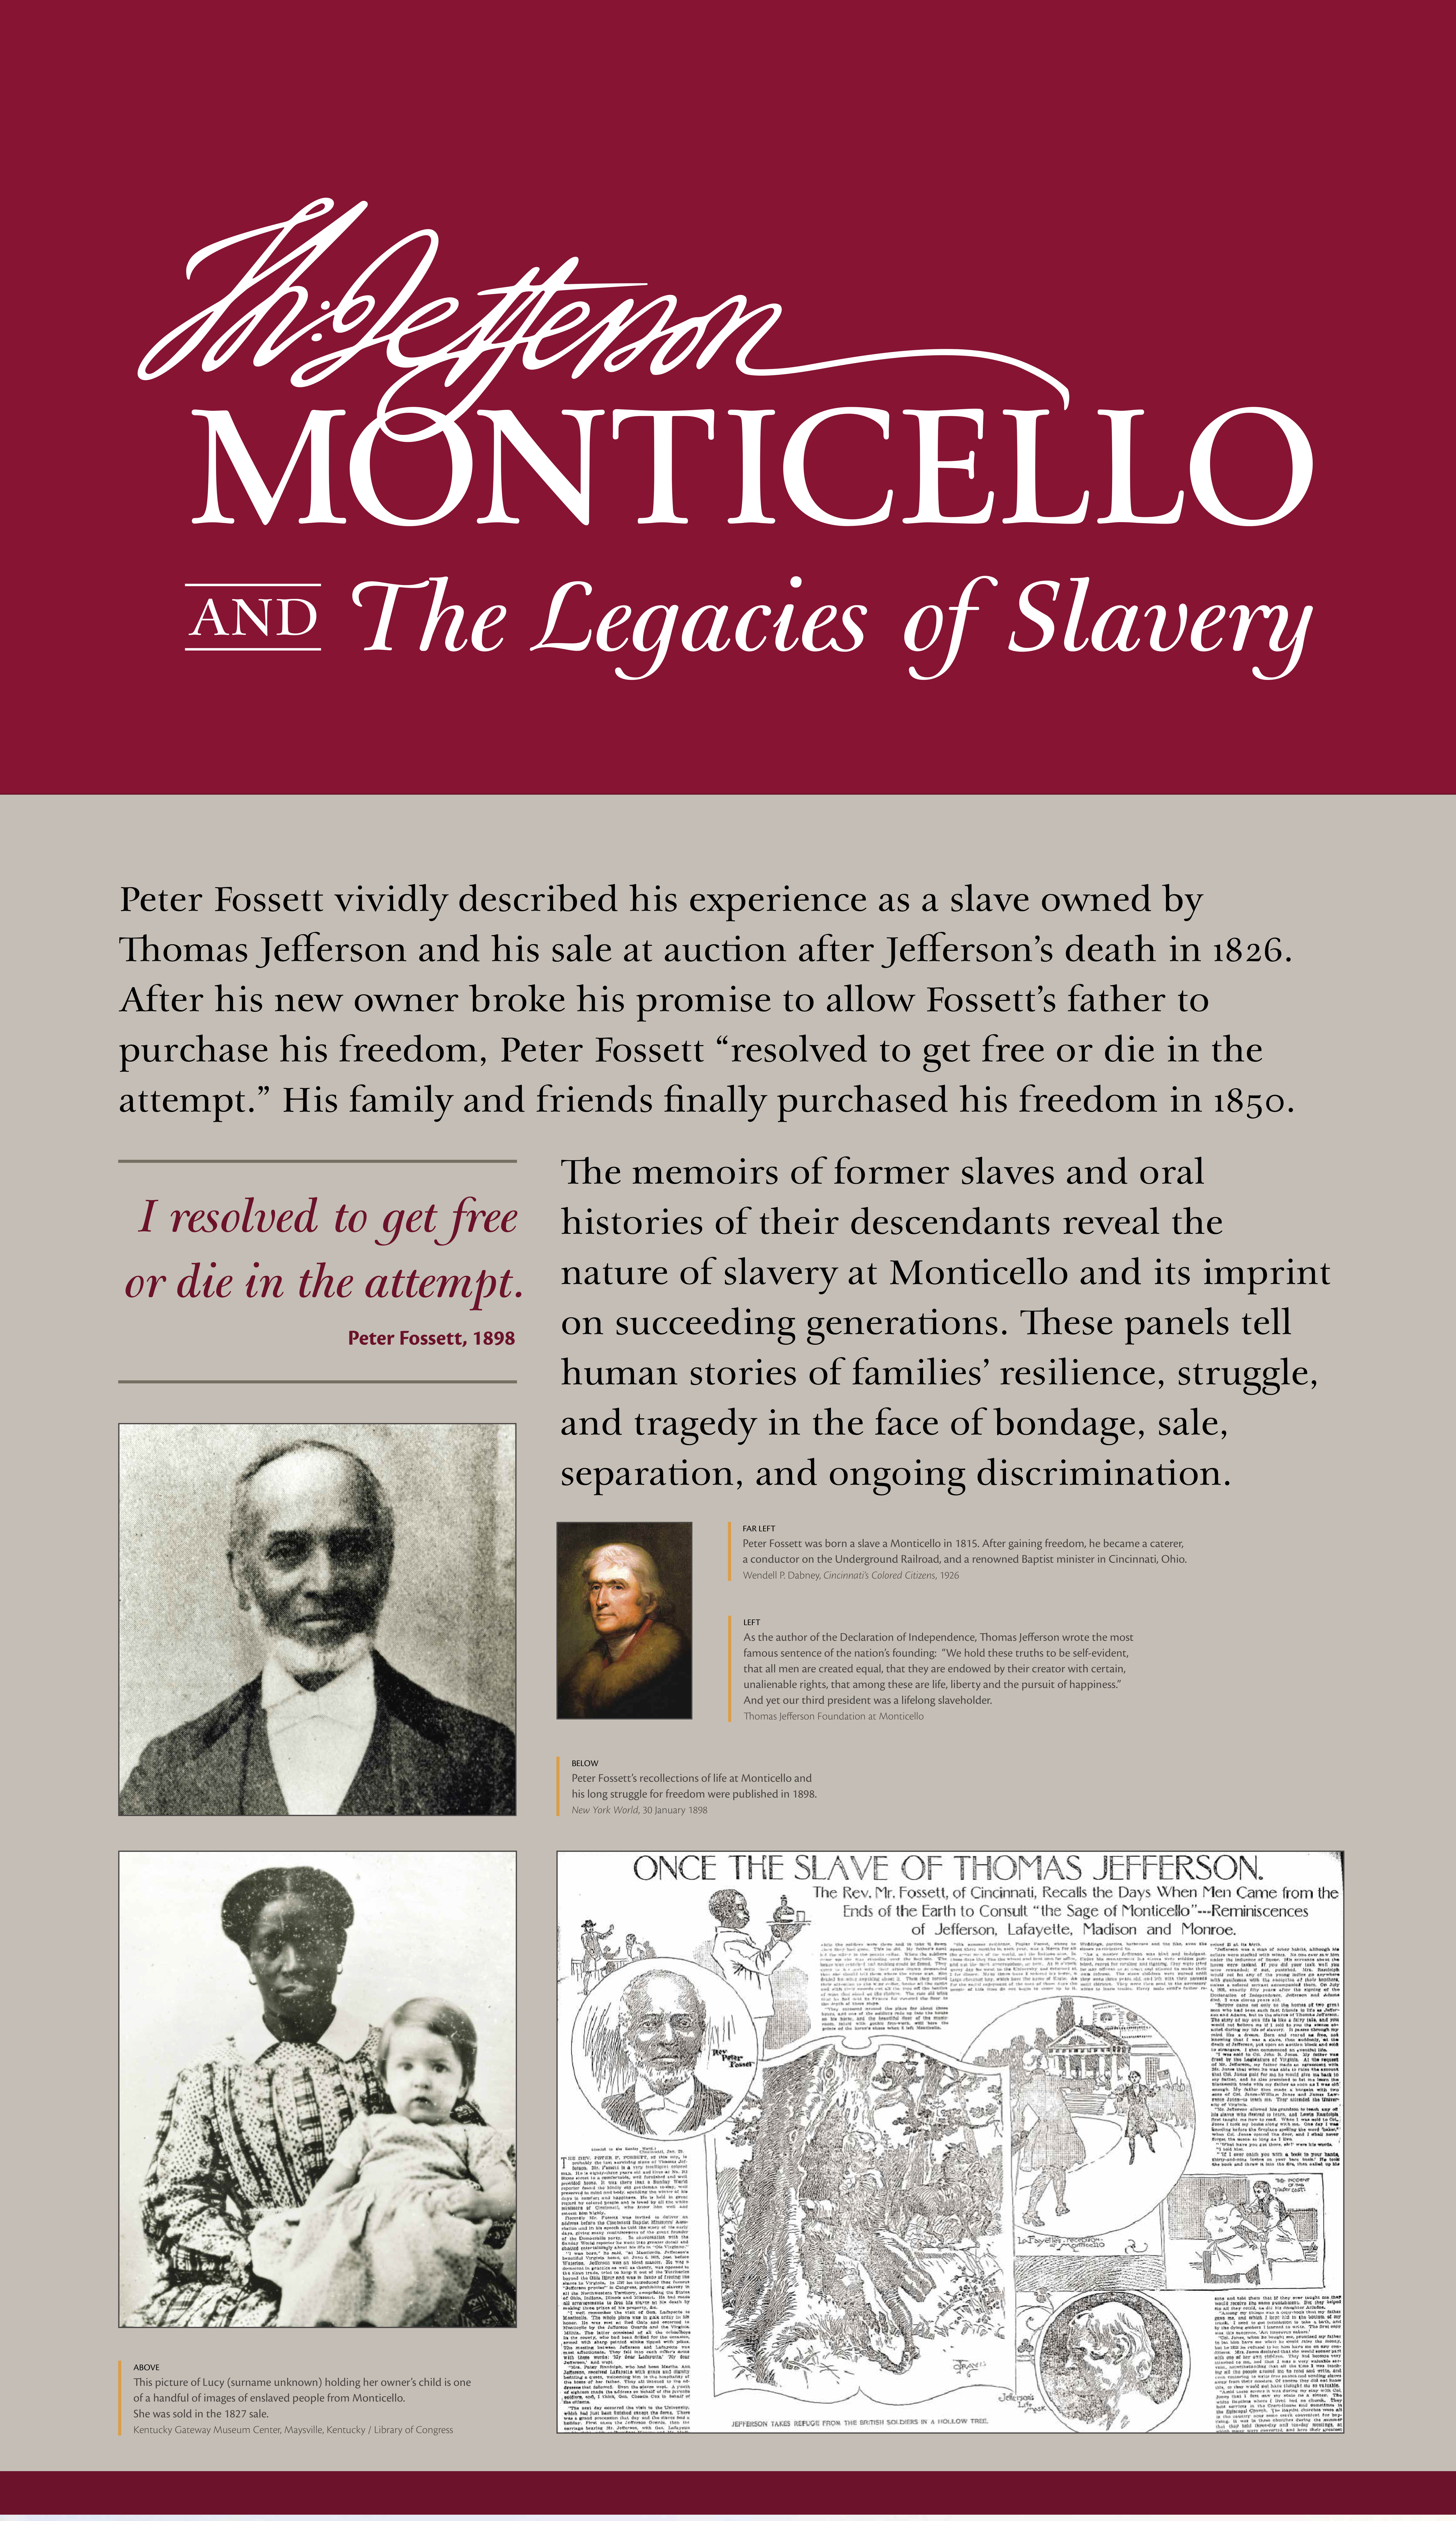 Monticello and the Legacies of Slavery panel